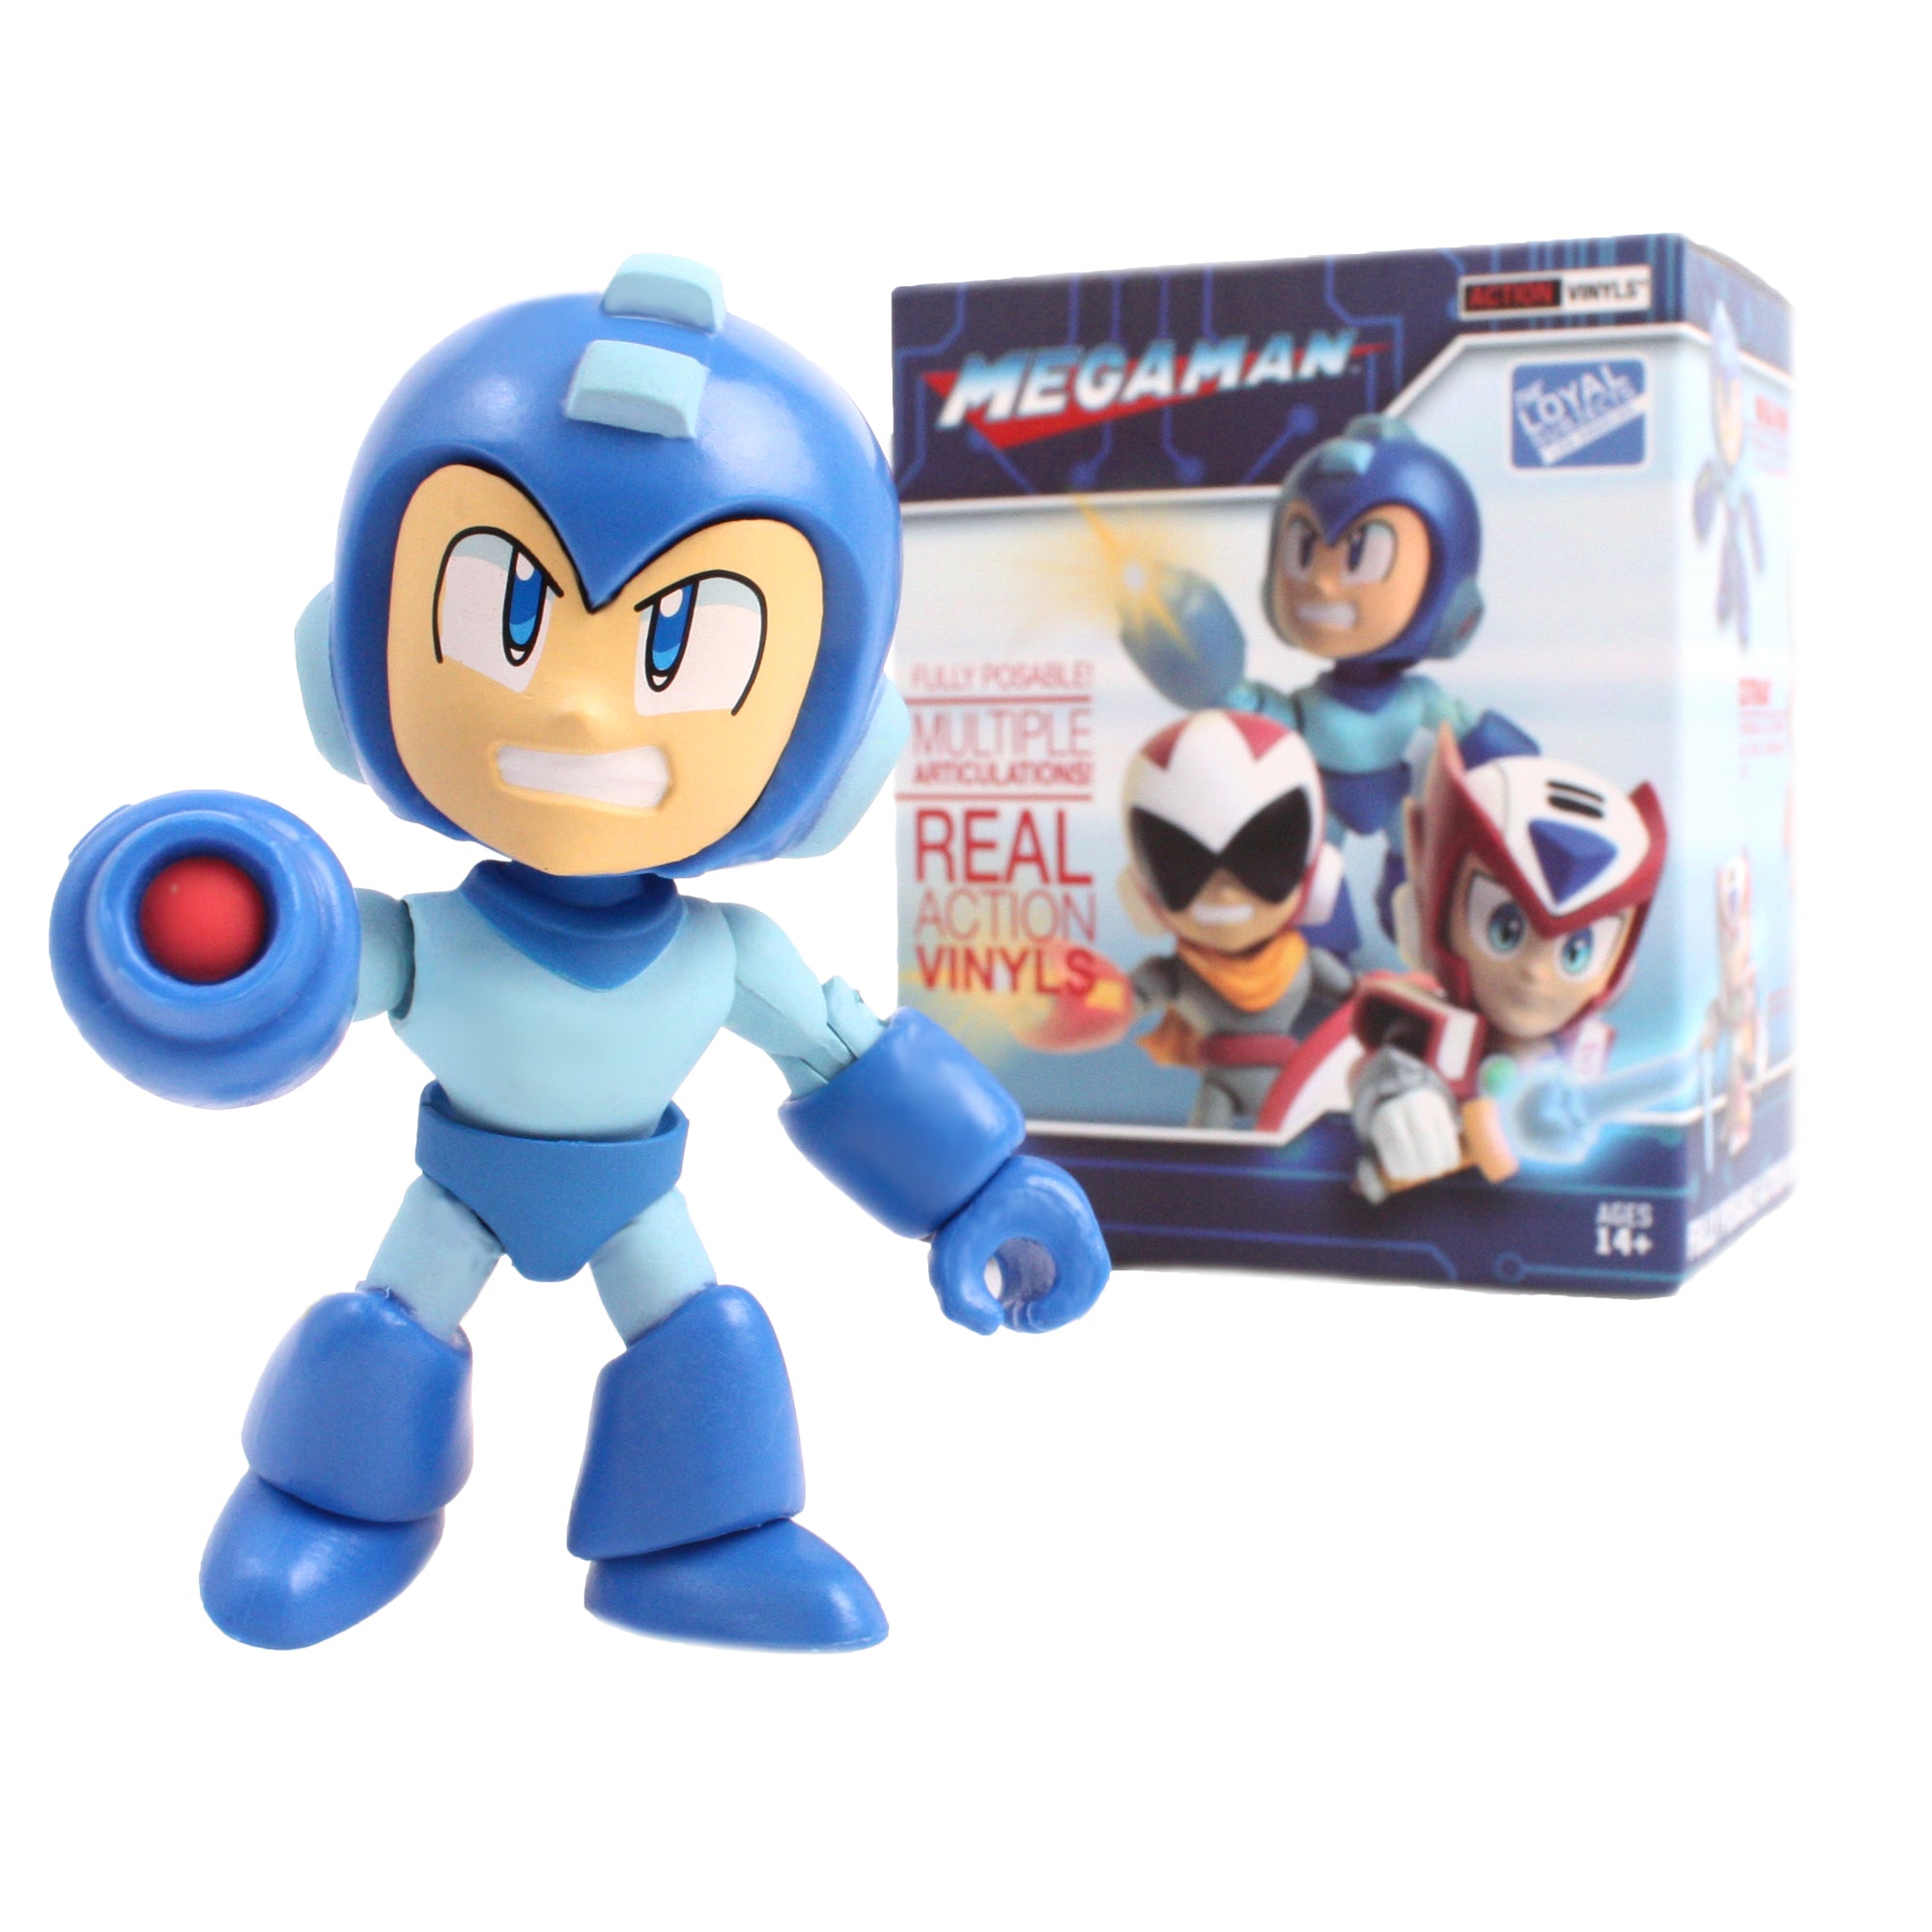 Mega Man Wave 1 Action Vinyls Blind Box Series by The Loyal Subjects